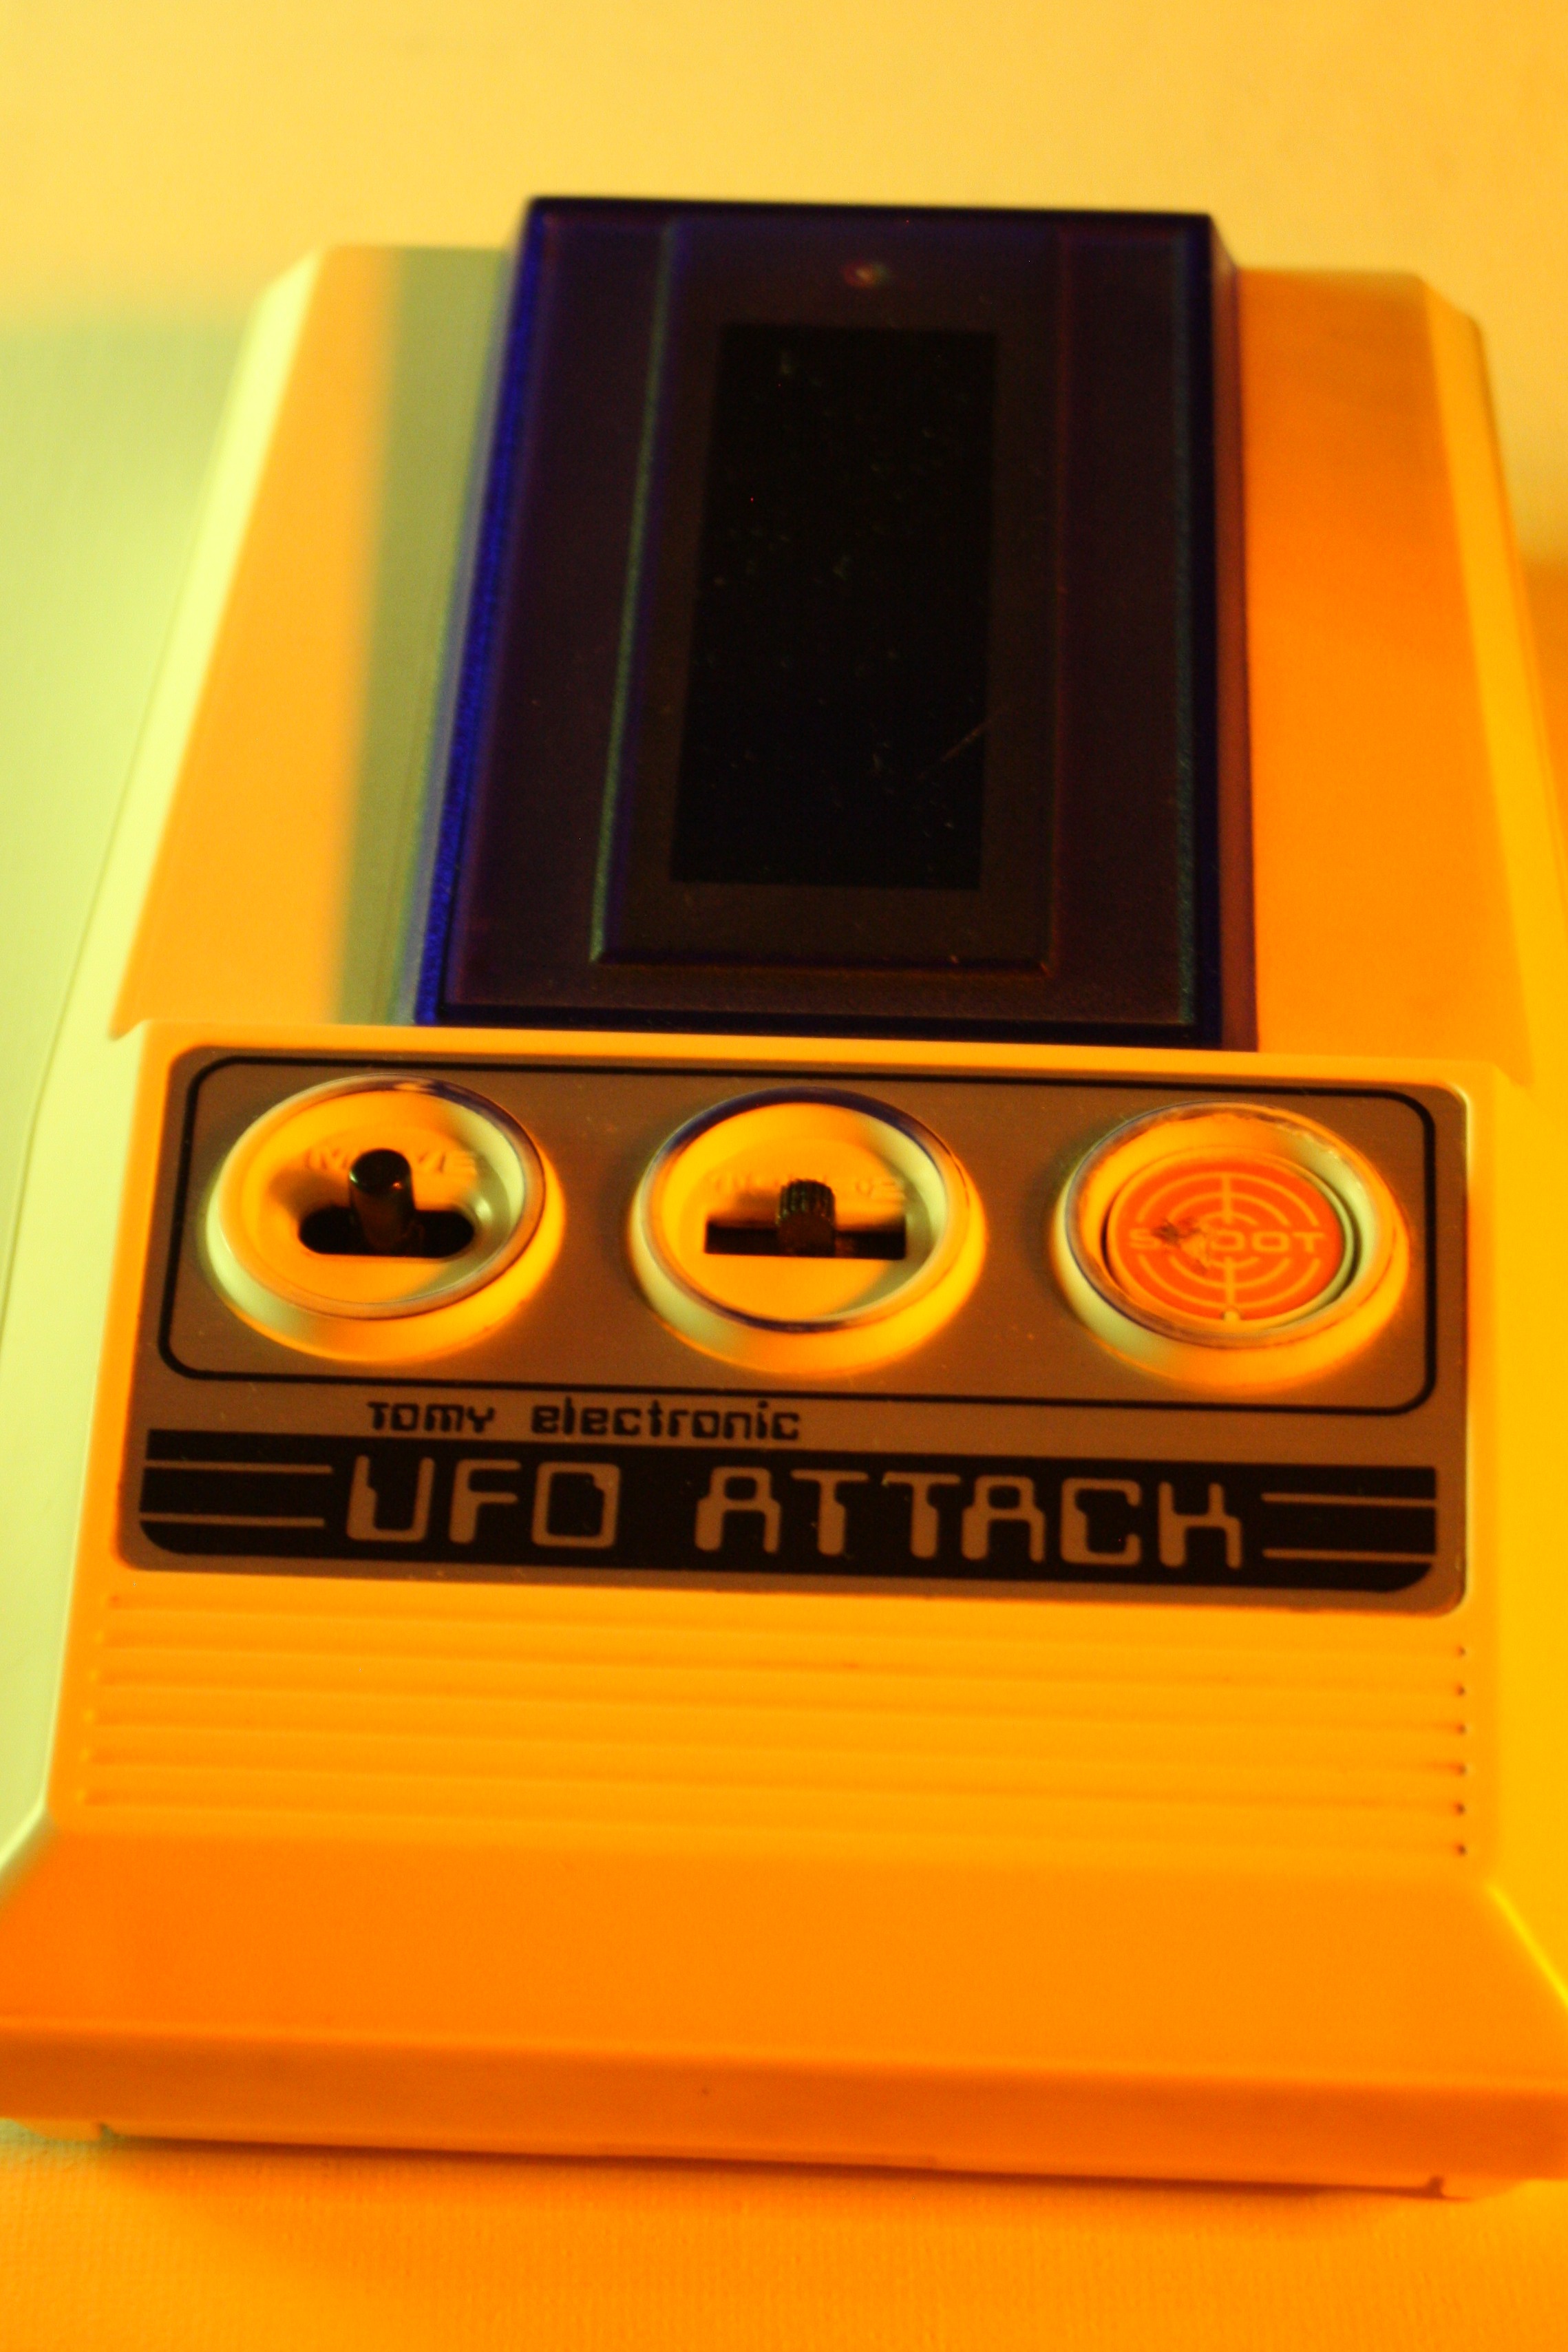 A handheld game, "UFO ATTACK", Takara Tomy, Japan, 1980, working condition, Length: 21 cm